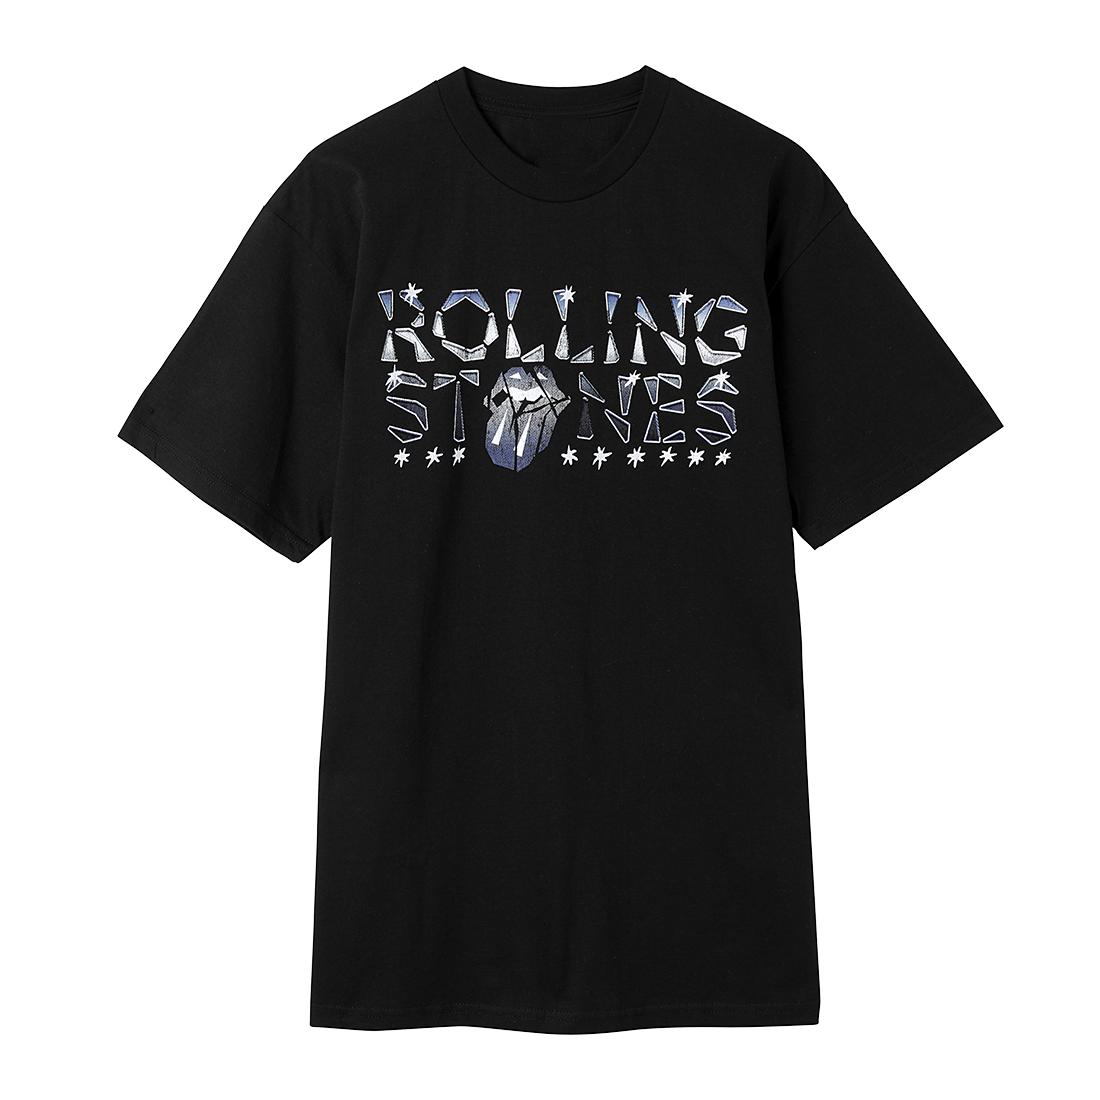 The Rolling Stones - Rolling Stones Icy T-Shirt